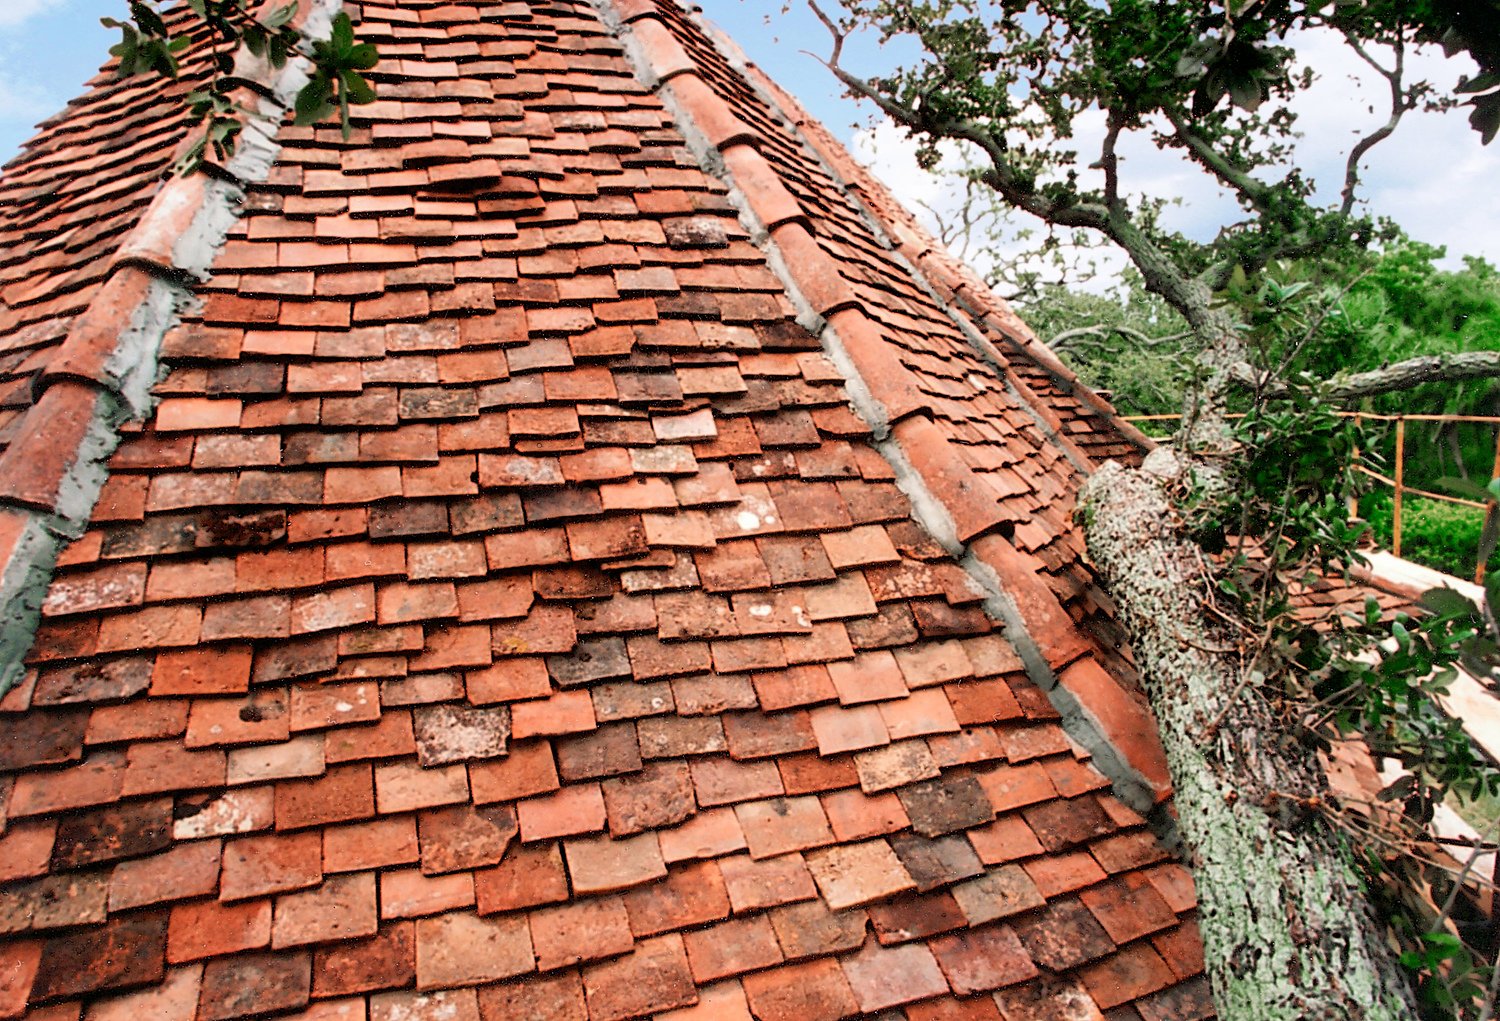 How Long Does a Roof Restoration Take?